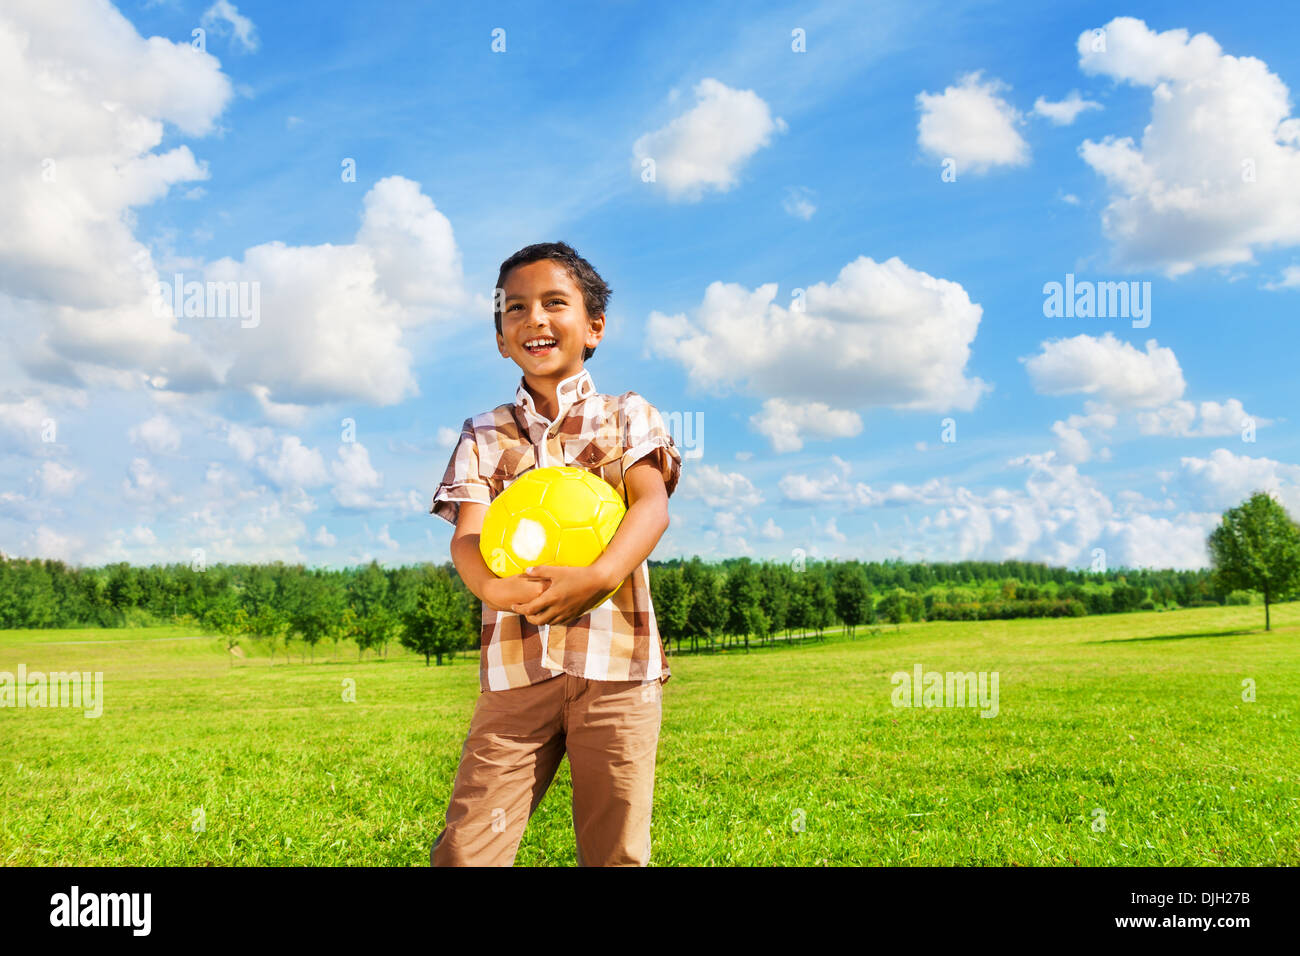 Happy dark boy standing with yellow volley ball Stock Photo